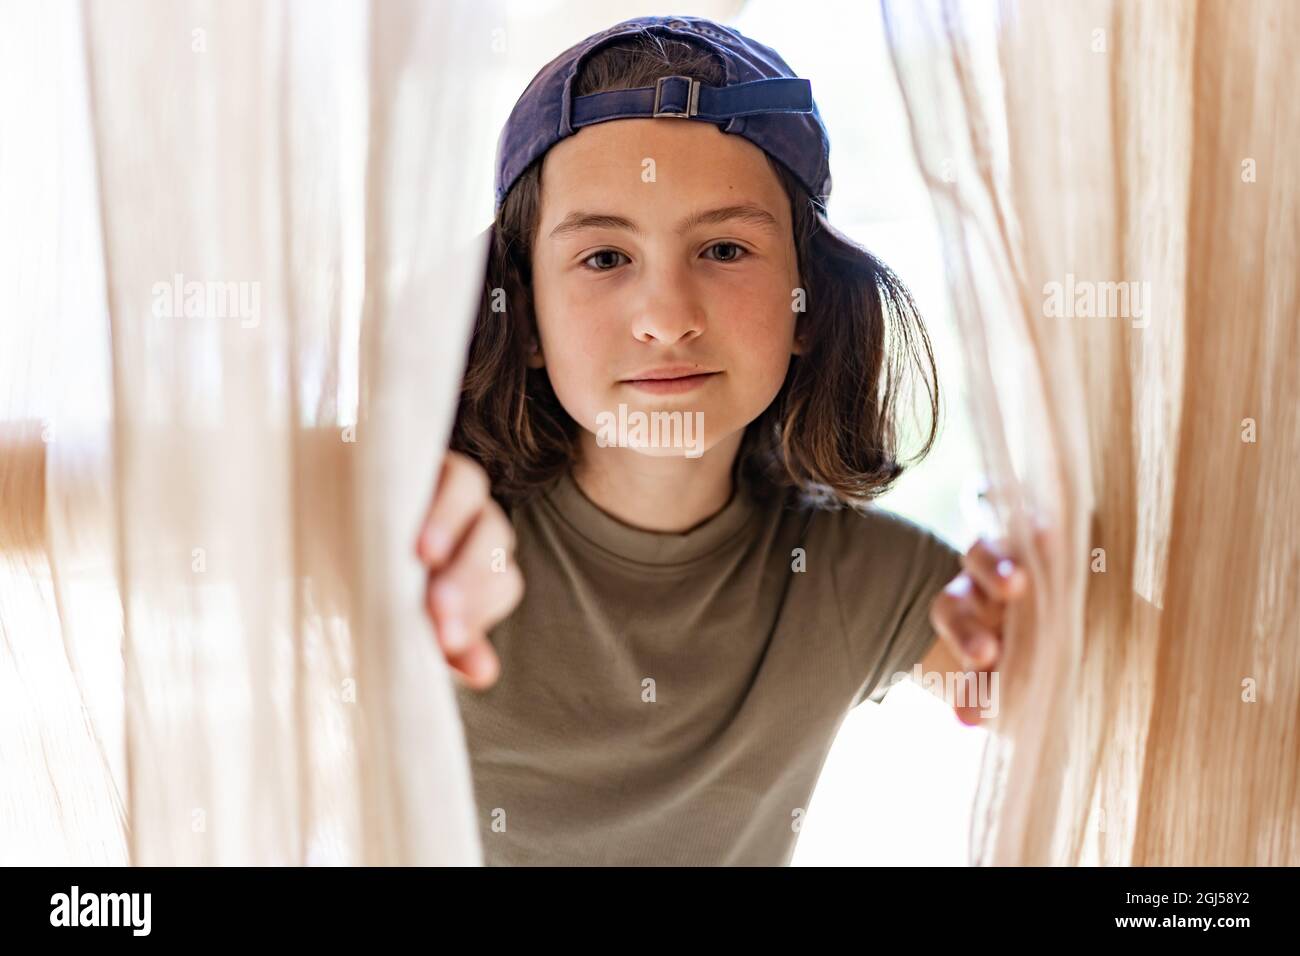 Verandert in Economie Baron Summer portrait of a young pretty girl in an turned baseball cap. Cheerful  teen brunette girl. Close-up. Life style photography. Looking at camera  Stock Photo - Alamy